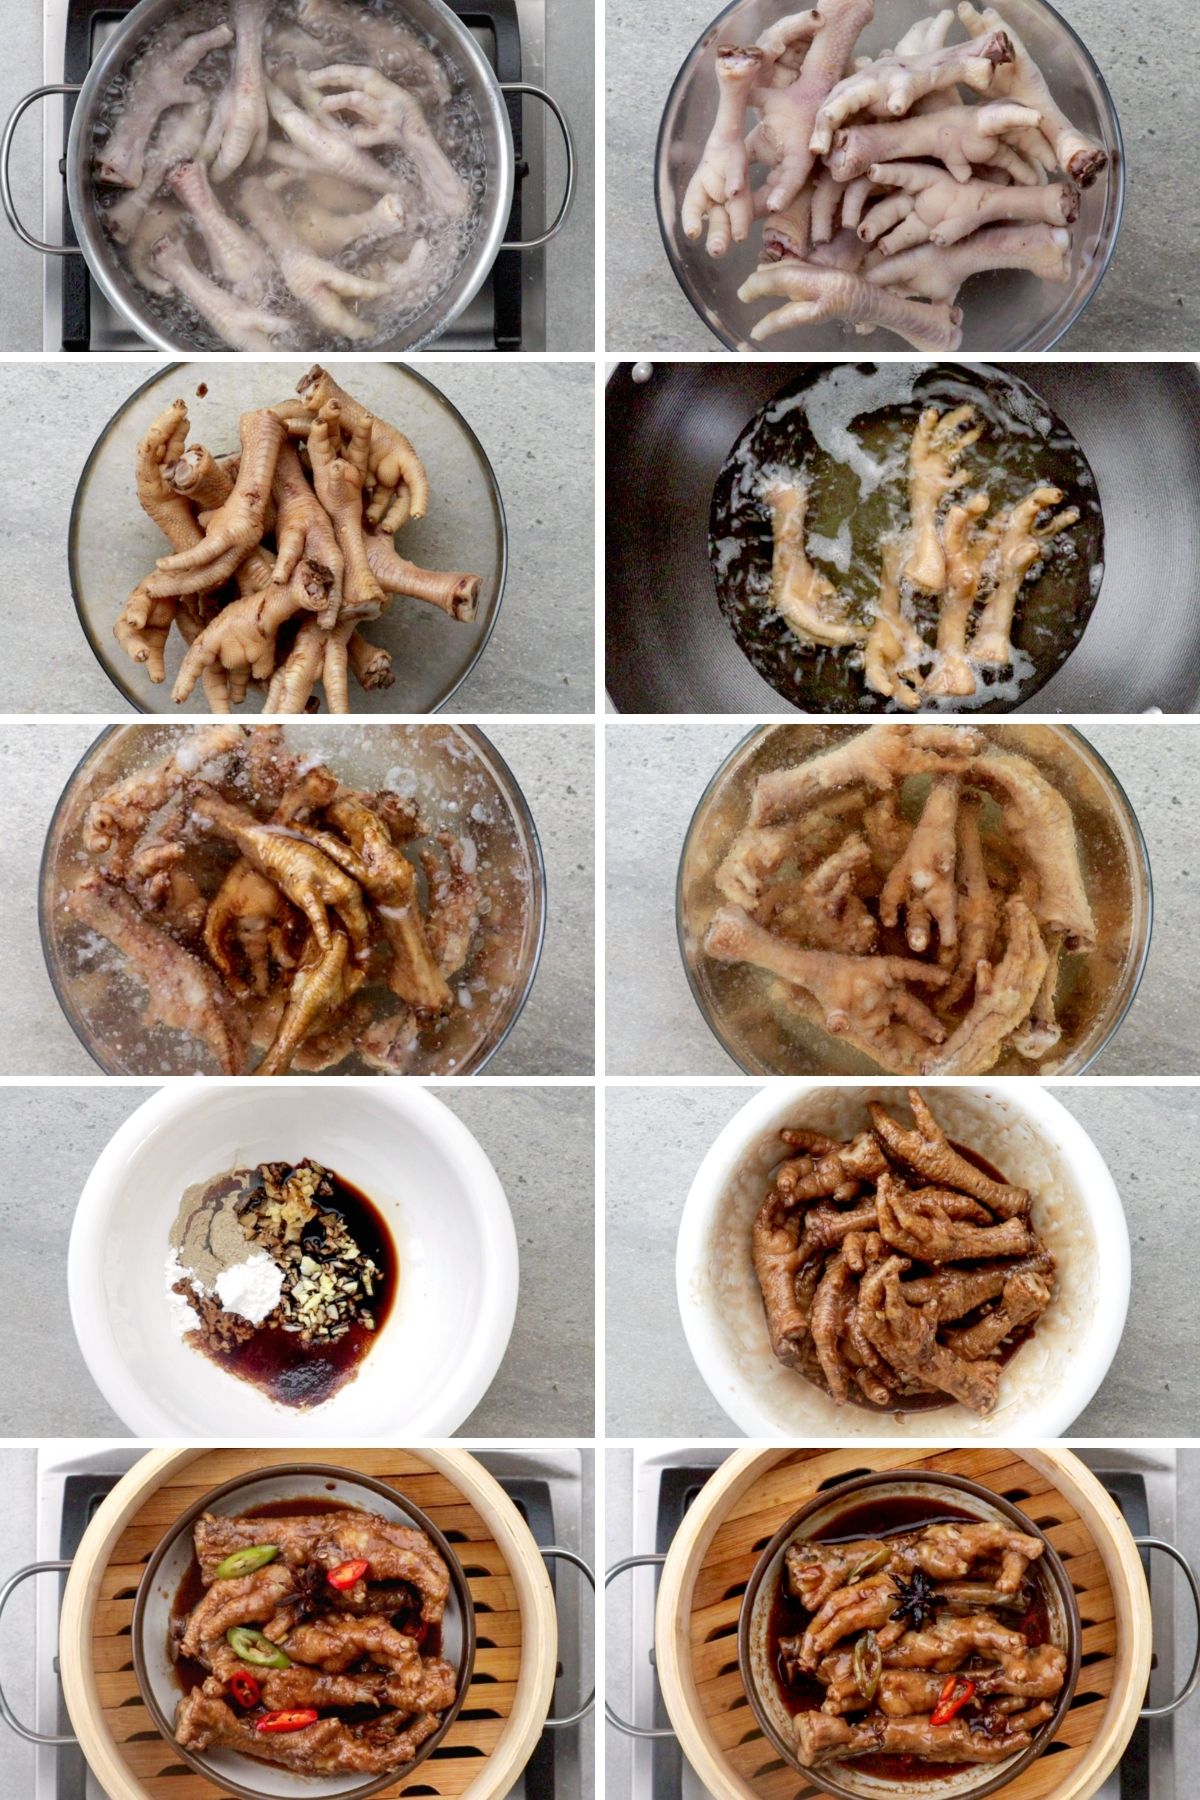 Steps on how to cook Chicken Feet Dimsum.